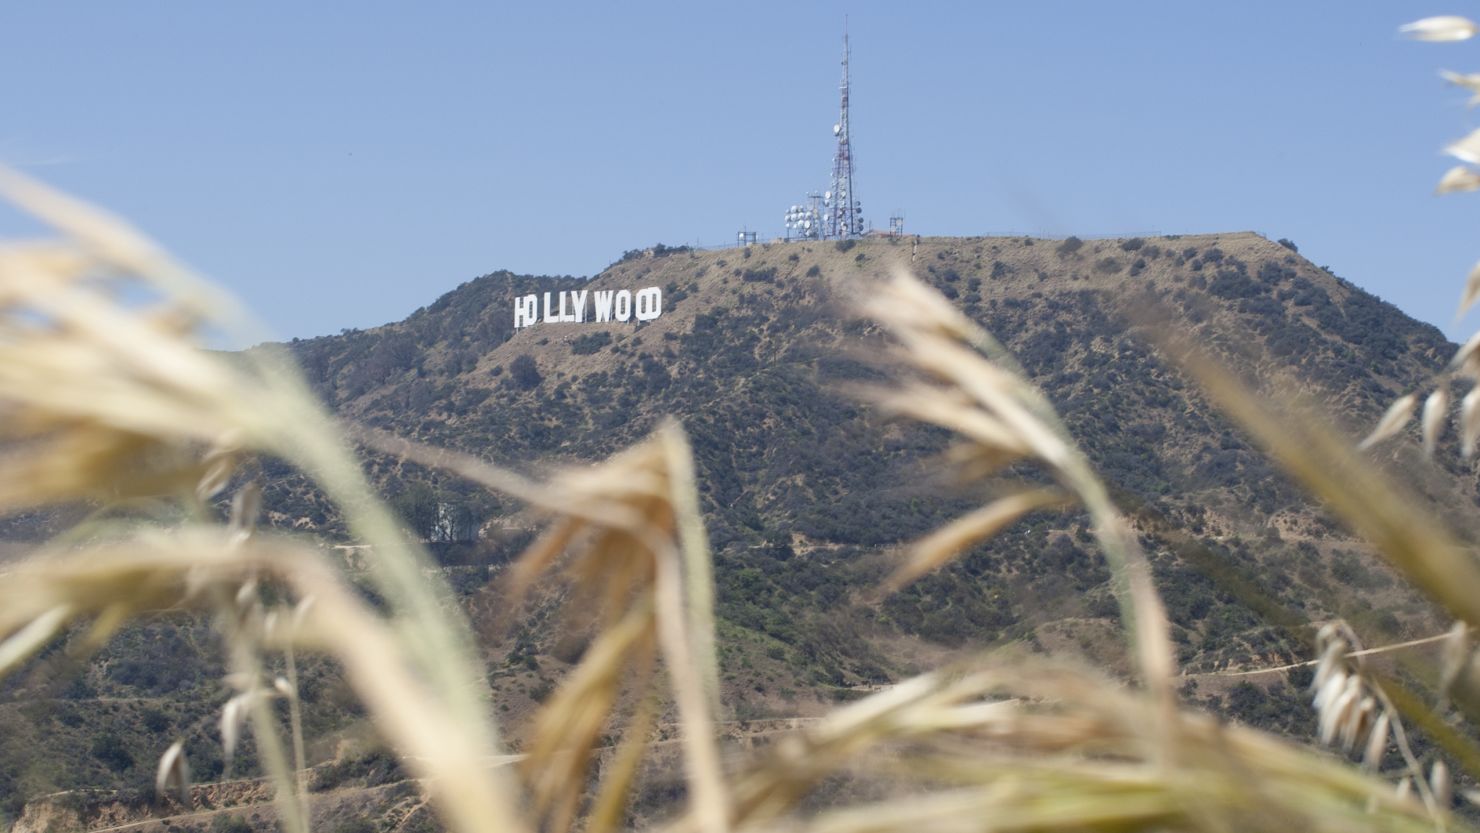  The iconic sign that overlooks the Hollywood area of Los Angeles, California, on March 29, 2015.